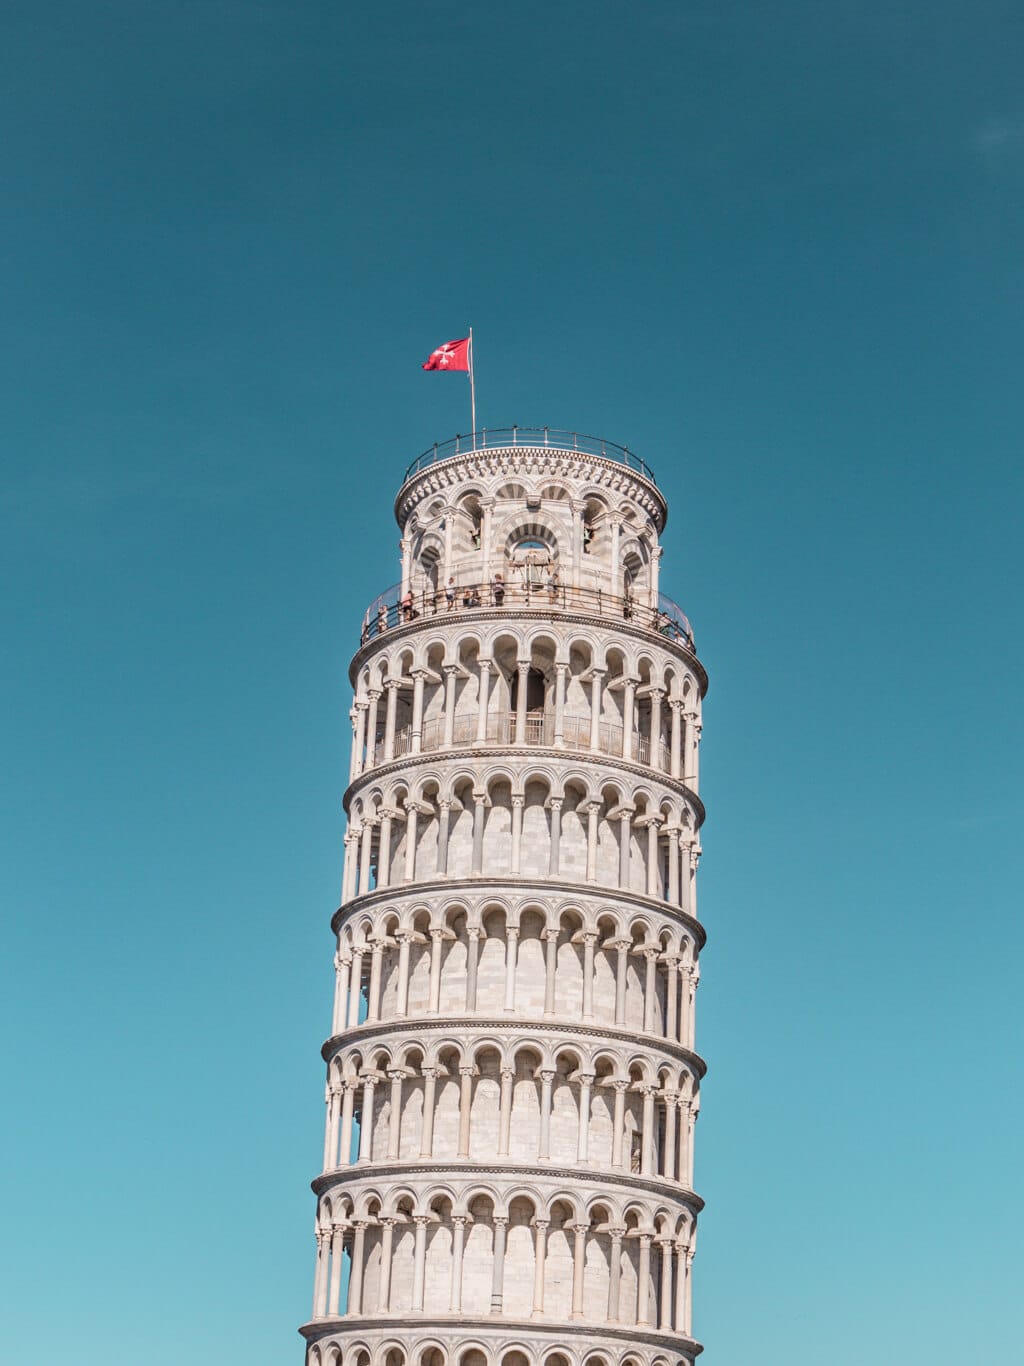 Pisa || A Guide For Planning A Trip To Tuscany, Italy - Things to do, including food & restaurants tips, wineries, and road trip tips